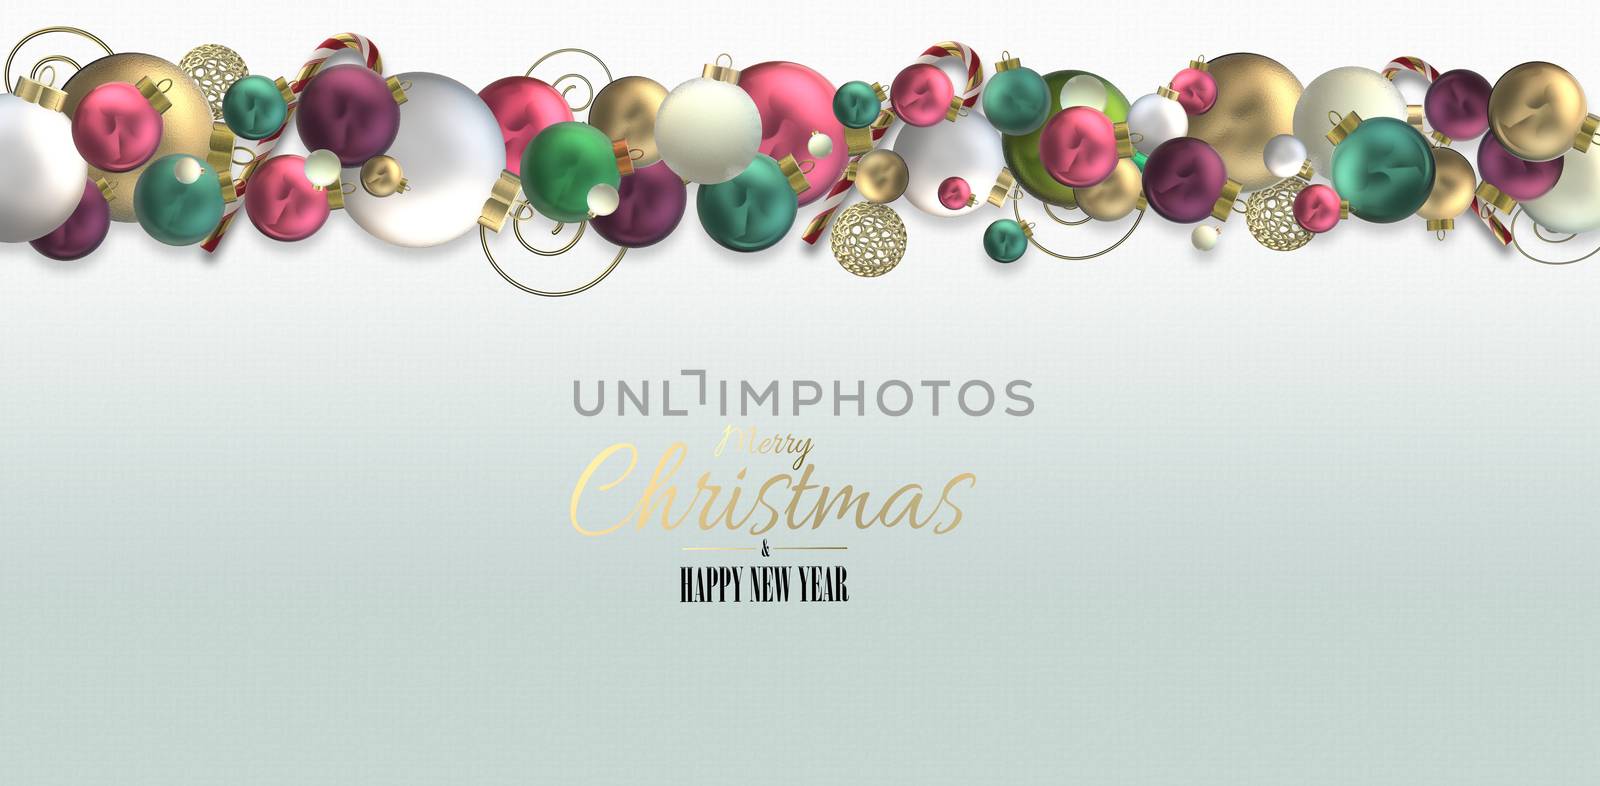 Christmas holiday border on white with 3D realistic balls, baubles, Xmas symbols. Festive Christmas New Year design for header, web, invitation. Place for text. Horizontal 3D illustration on white